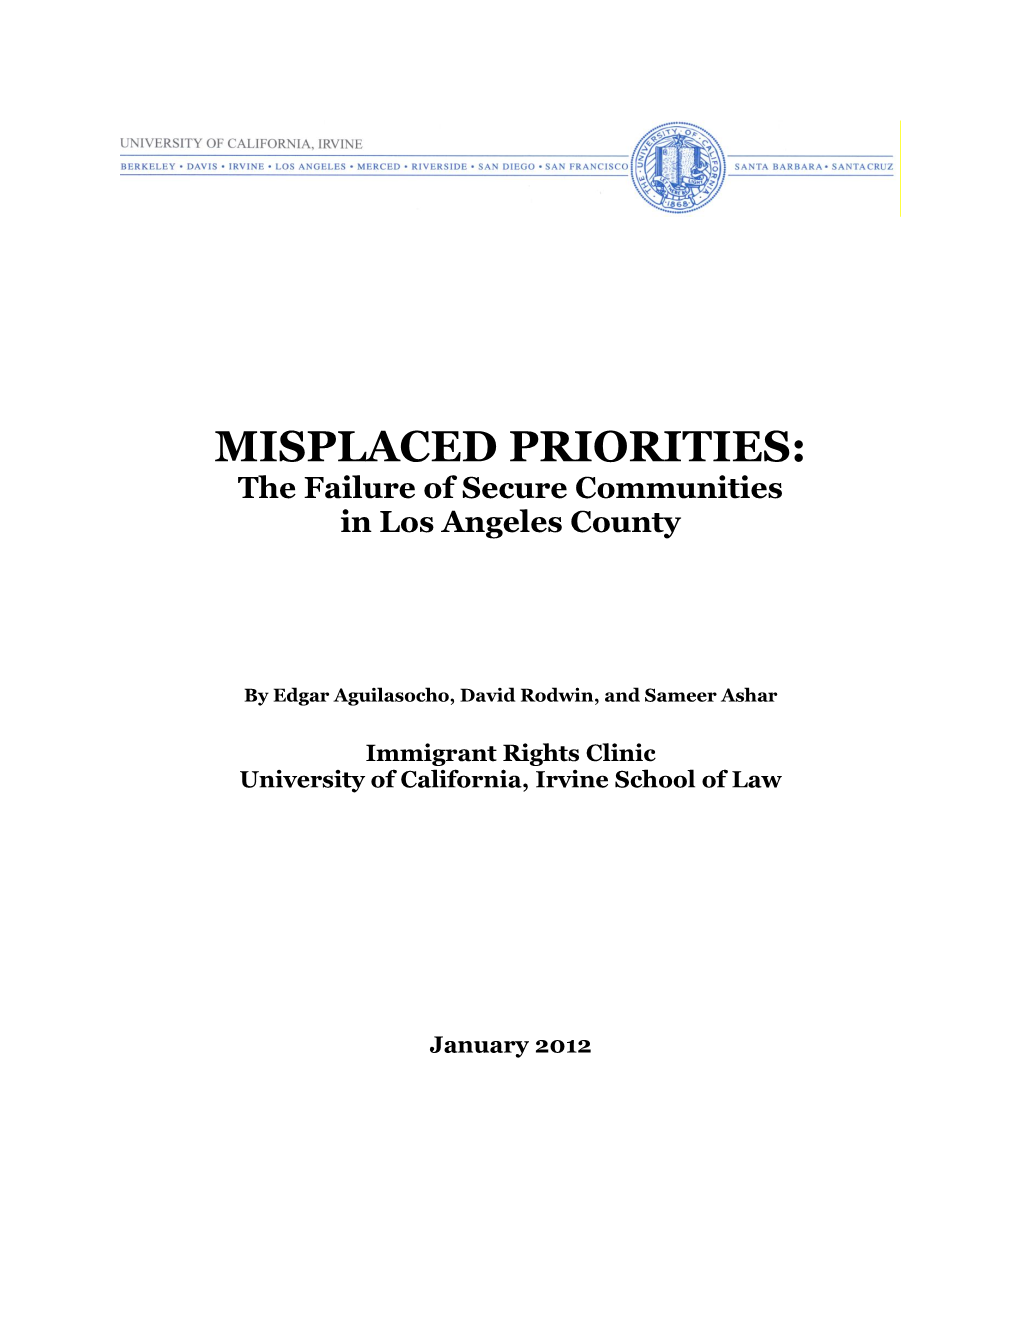 MISPLACED PRIORITIES: the Failure of Secure Communities in Los Angeles County